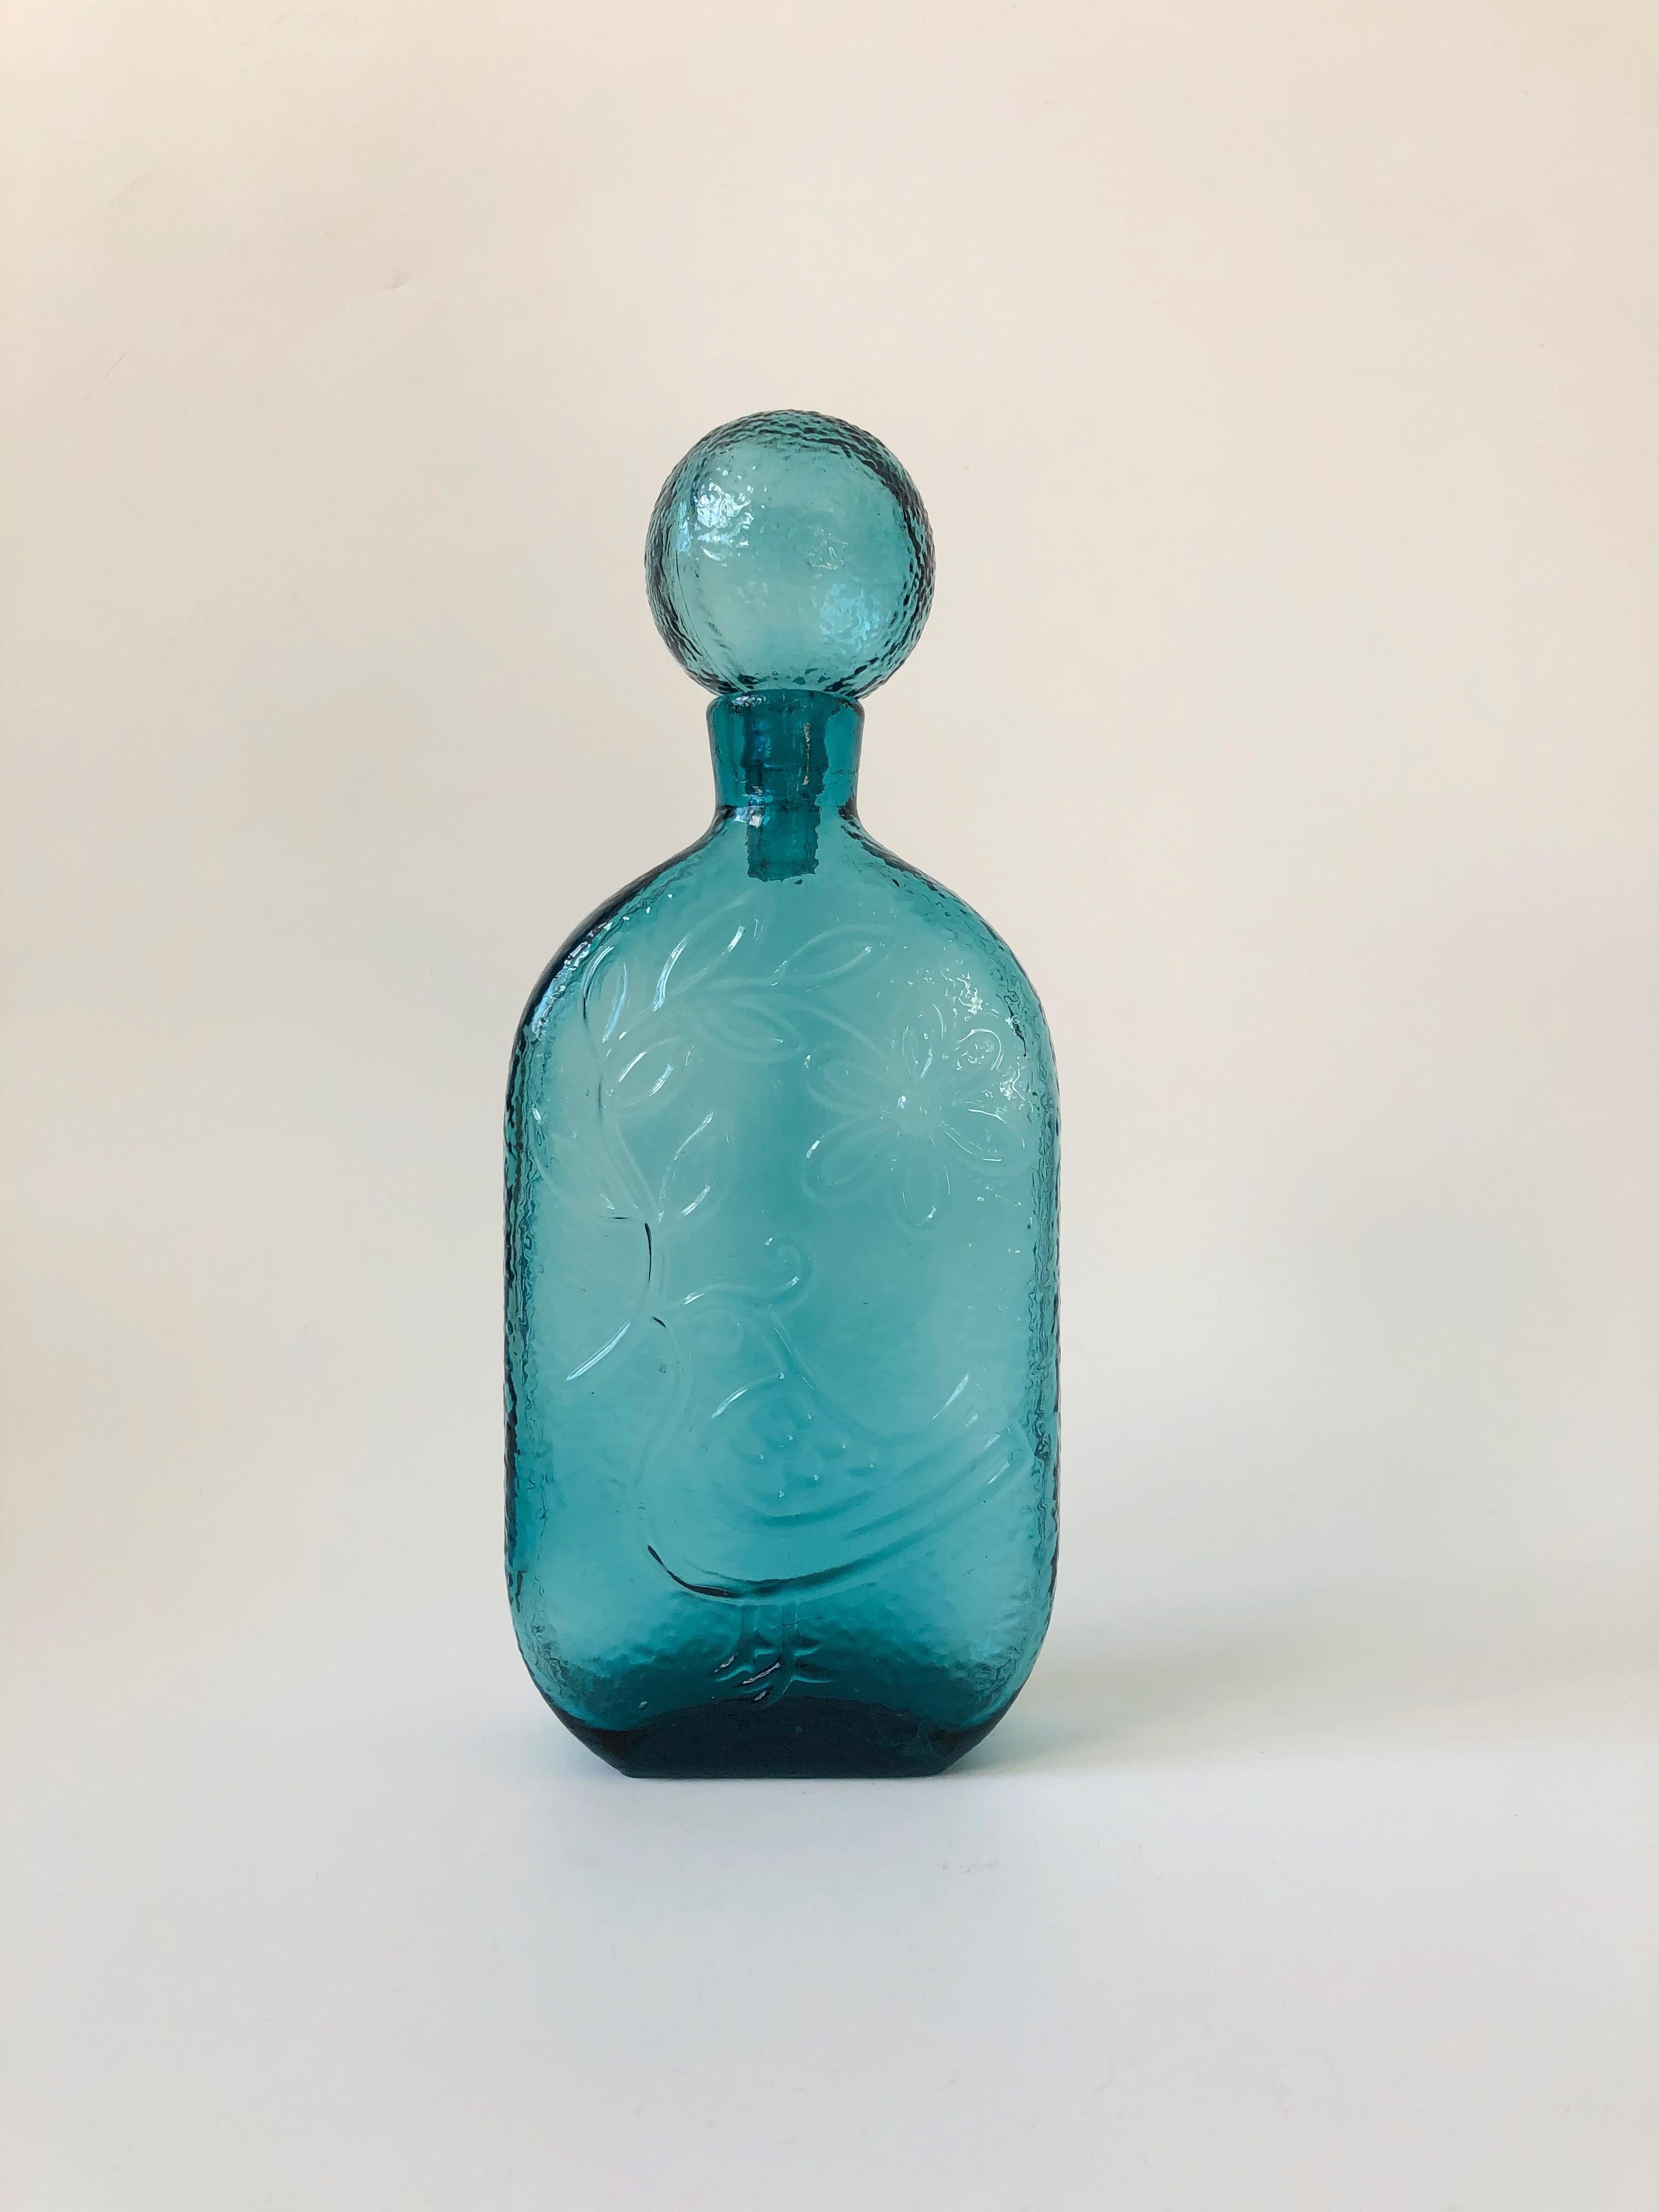 A wonderful large mid century glass decanter designed by Wayne Husted for Stelvia Glass of Italy. Beautiful textured design of a bird holding a flower vine on one side. Topped off by an oversized spherical stopper.
     